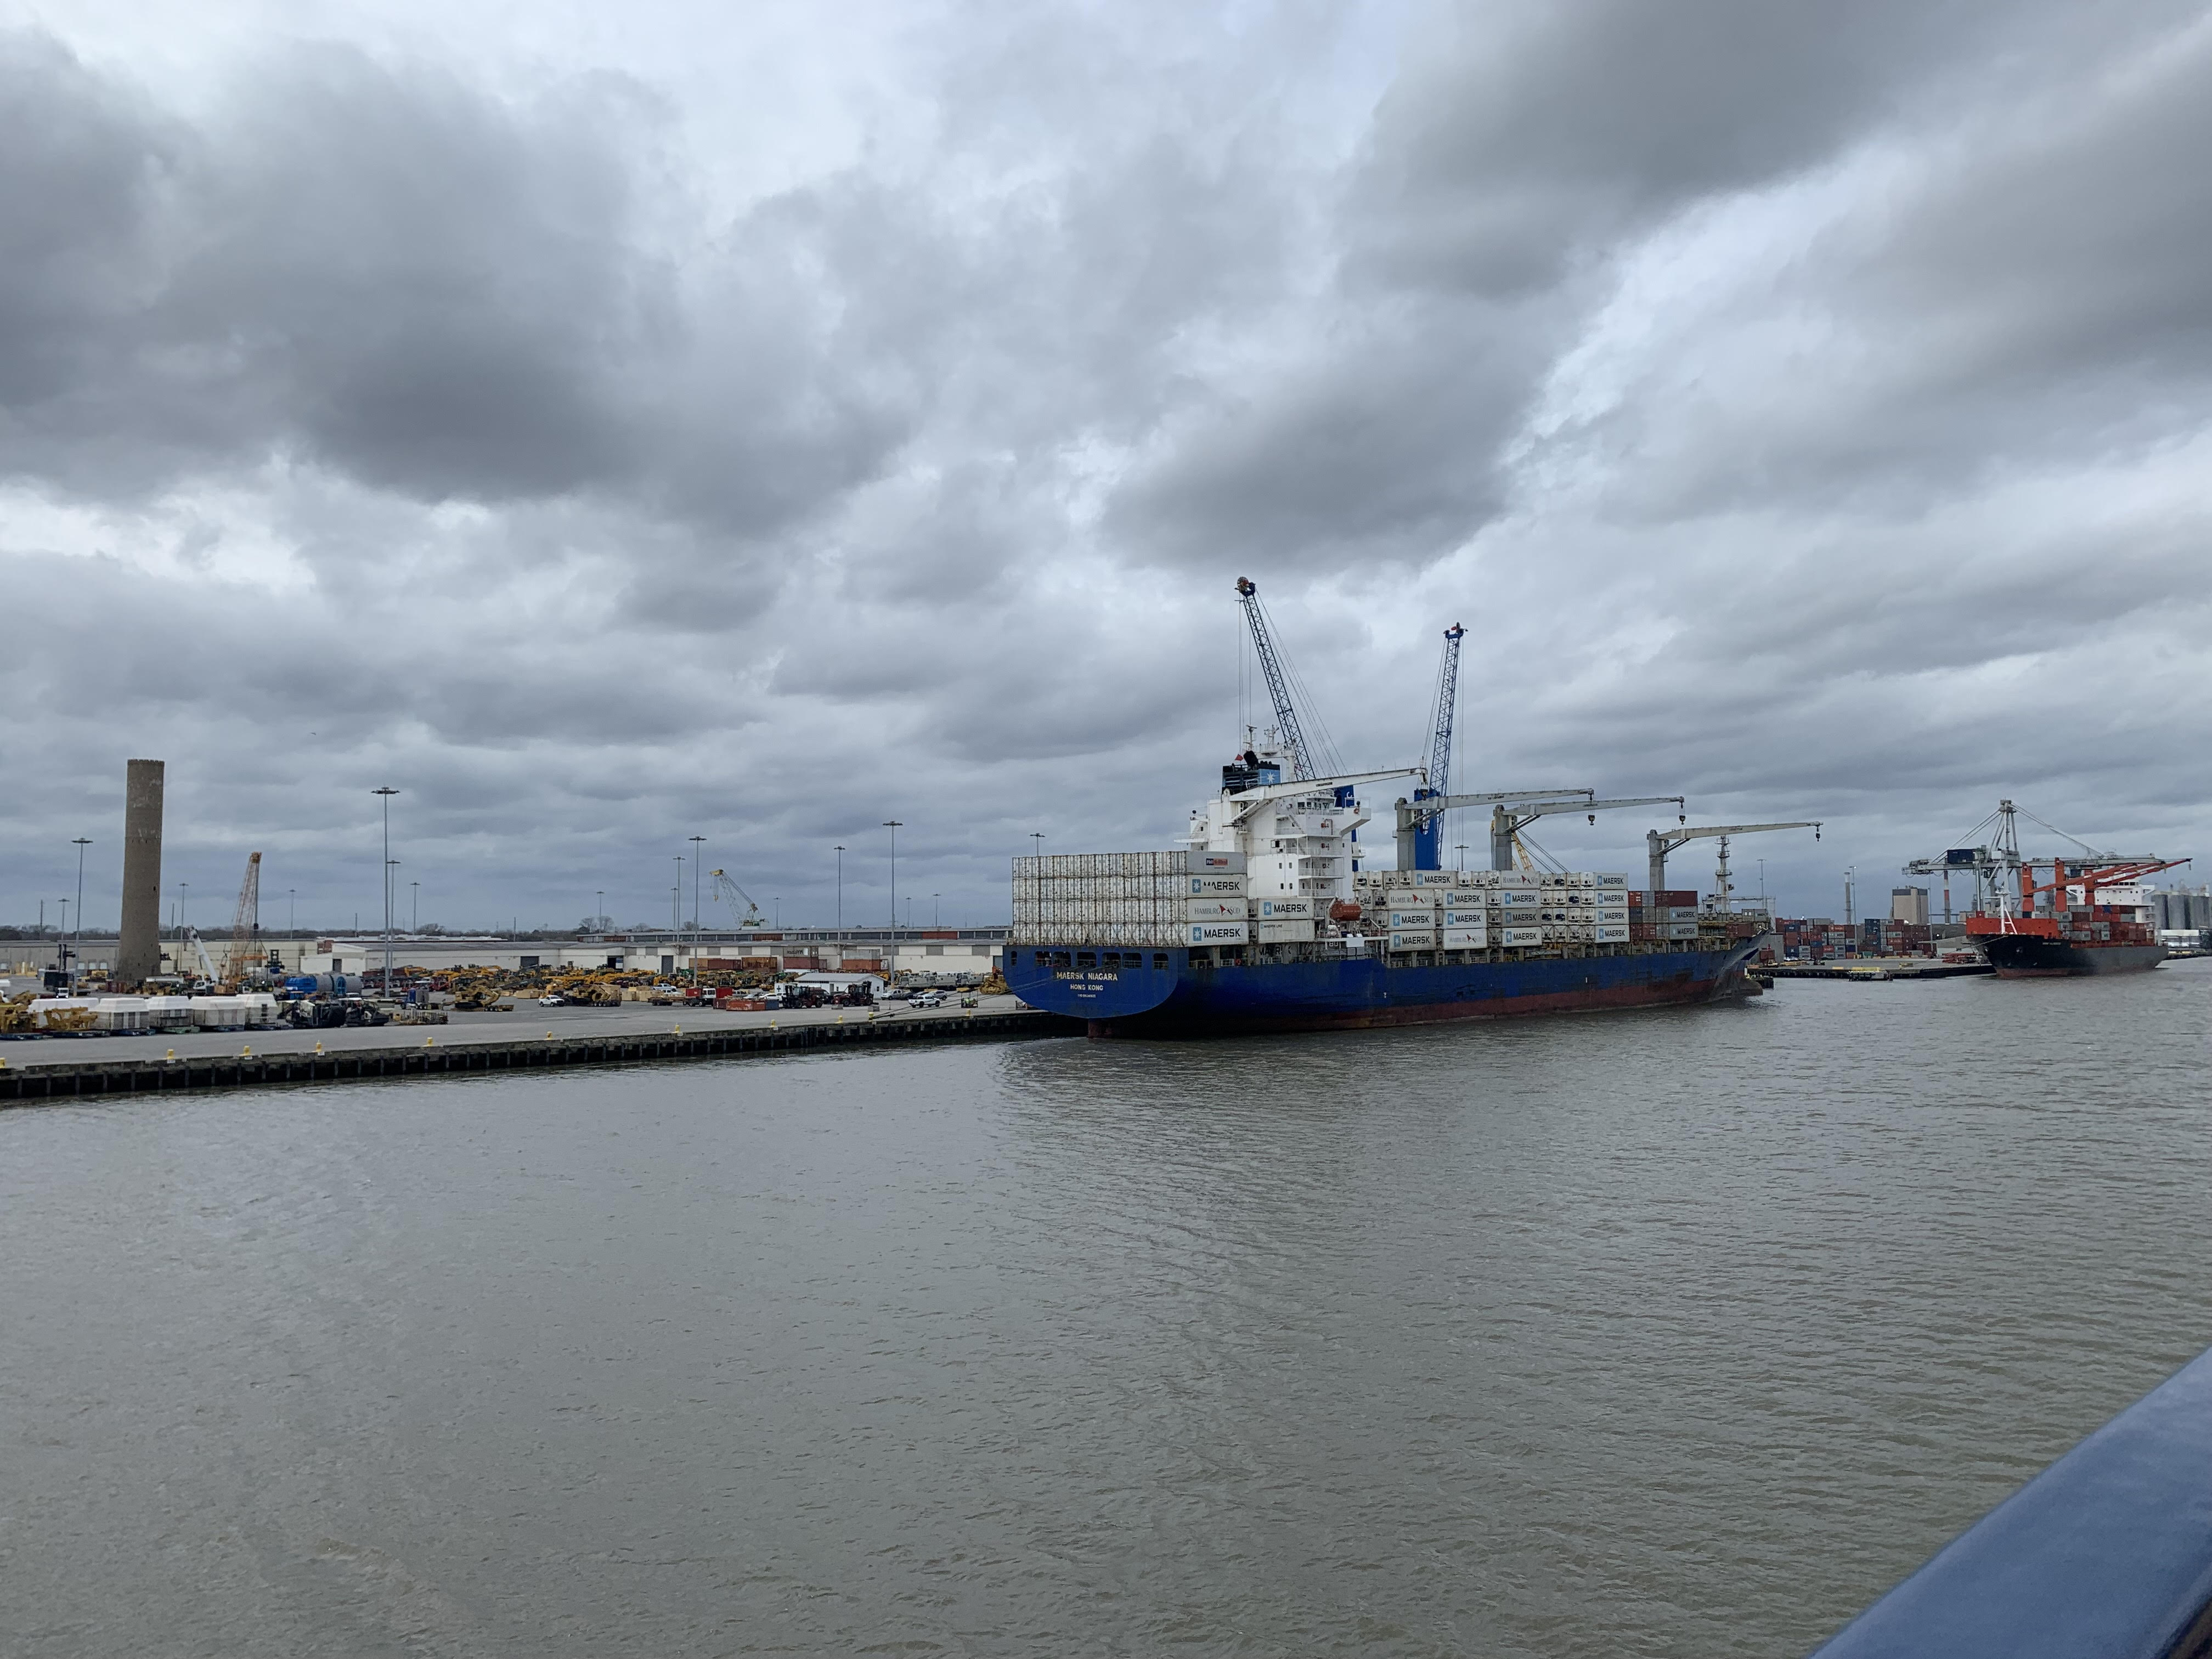 Afternoon Ag News, February 28, 2022: Port of Savannah to grow capacity by 60 percent